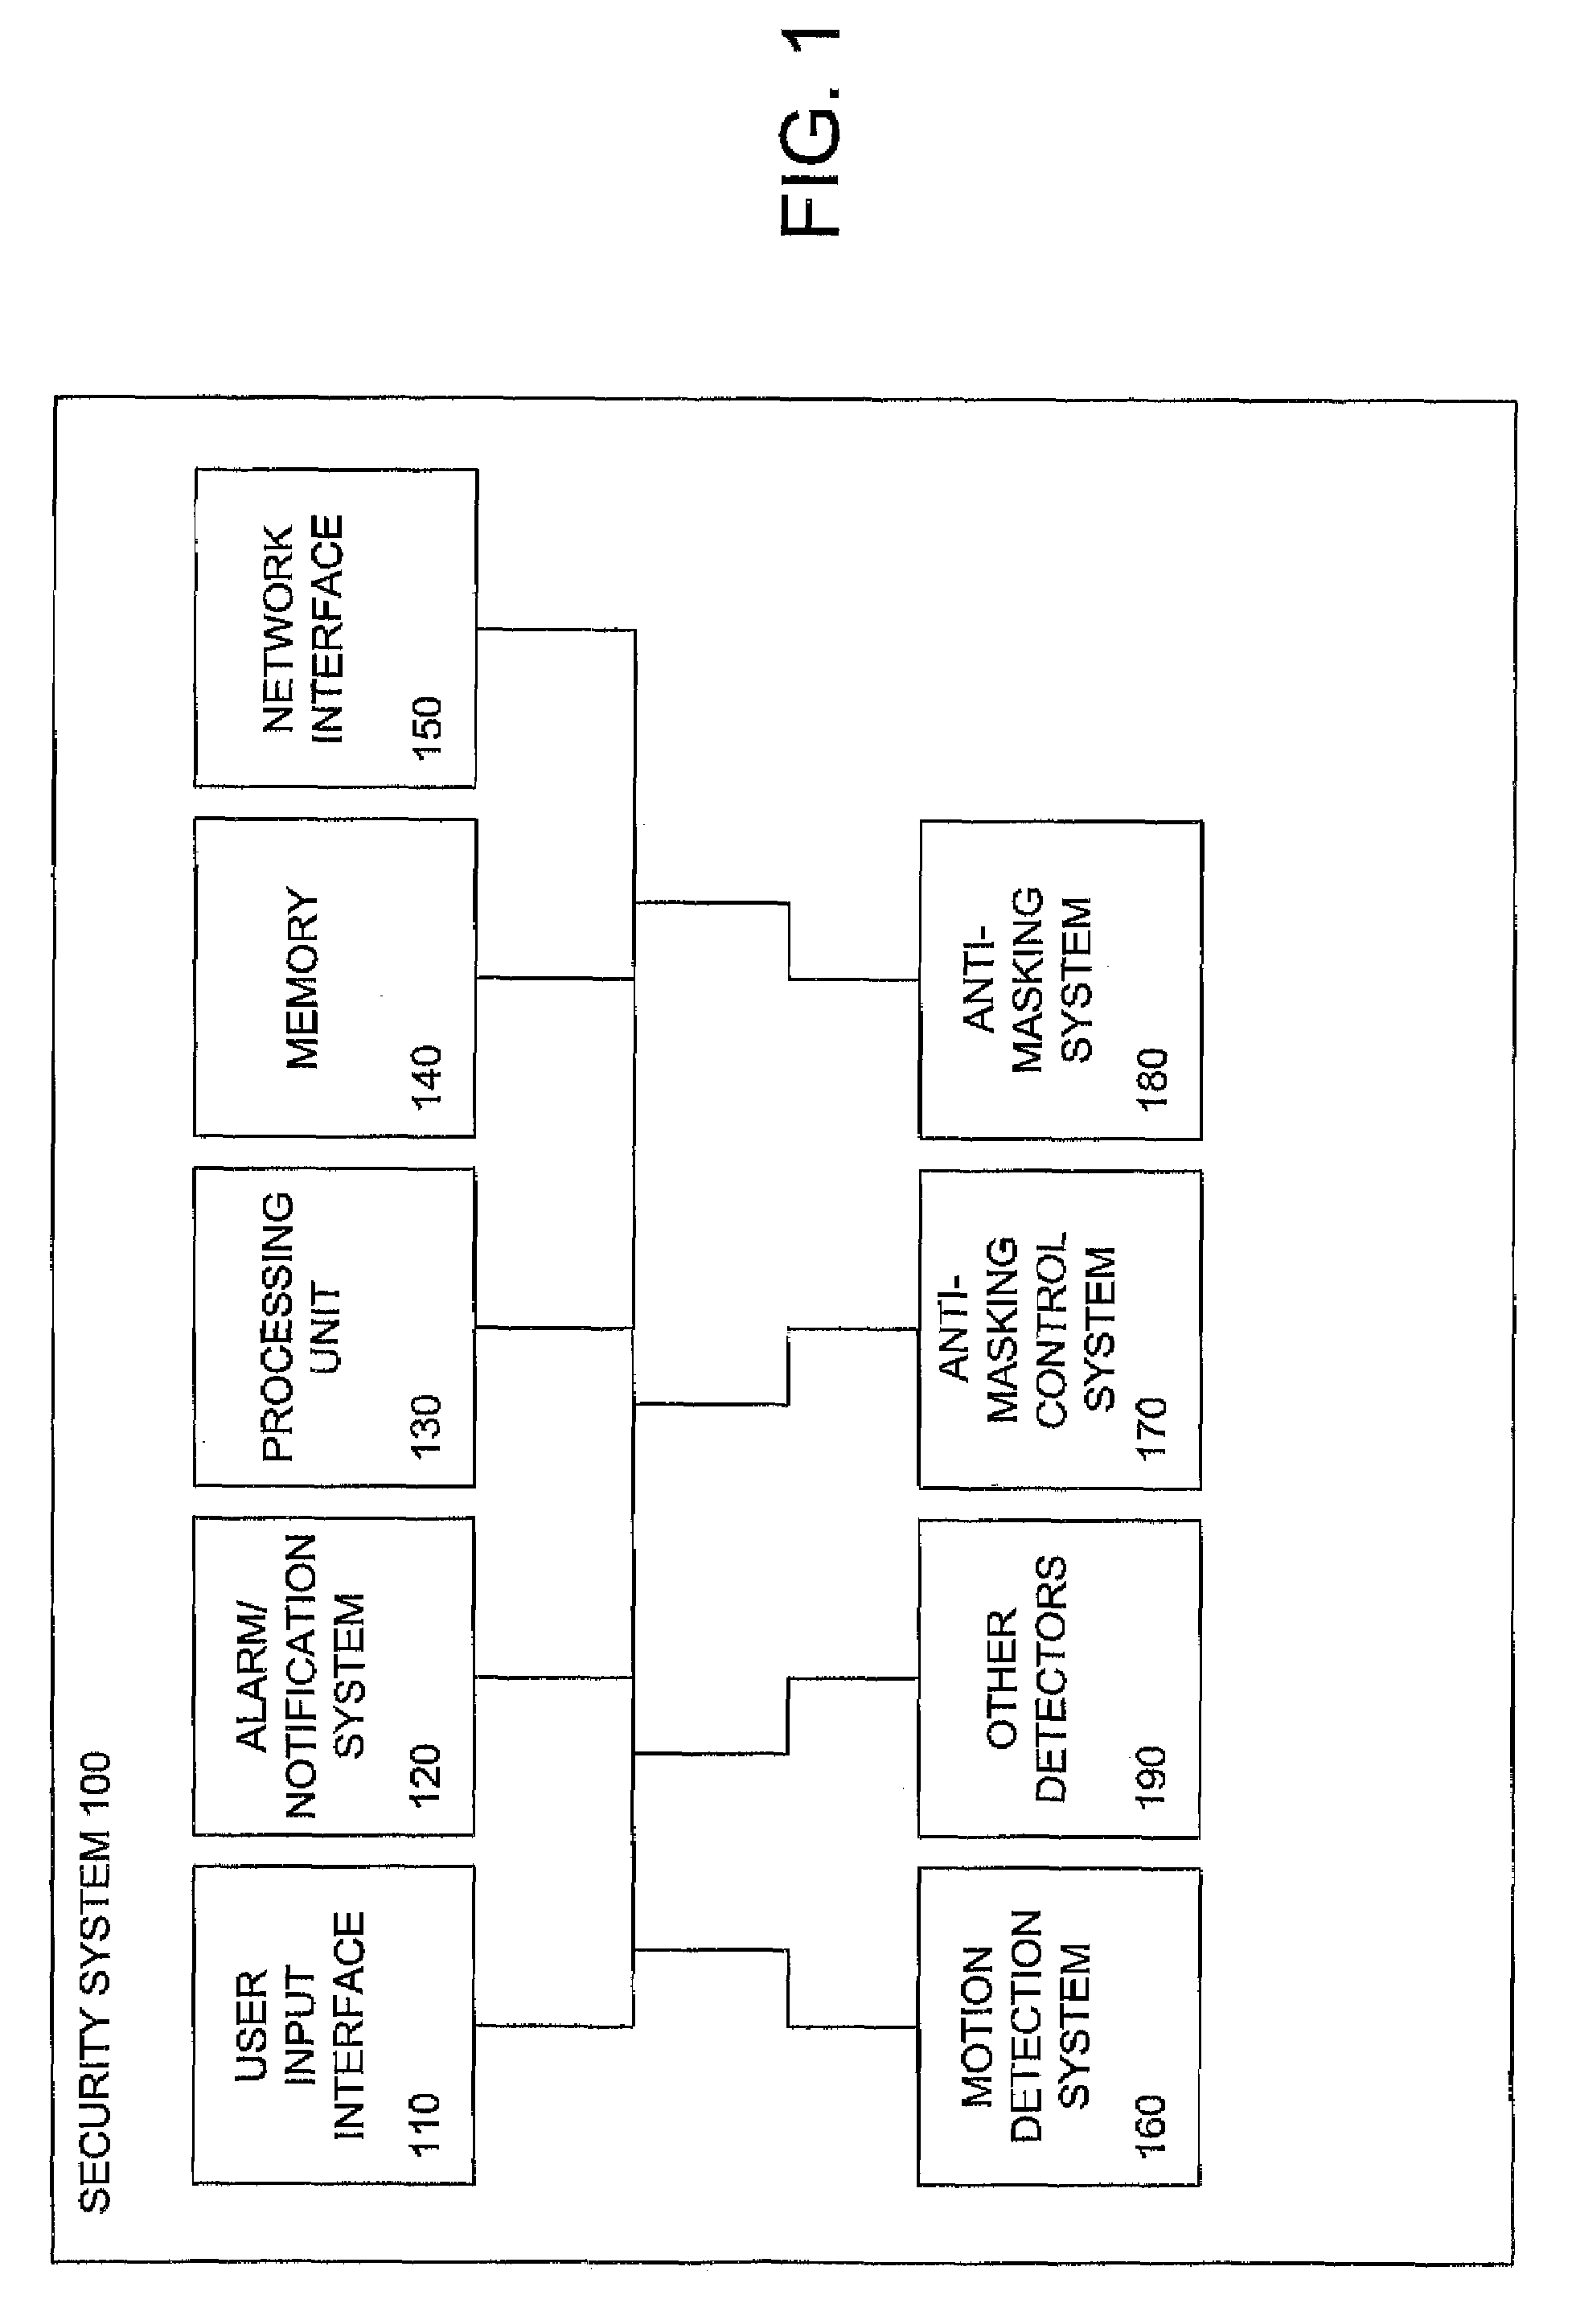 System and method for controlling an anti-masking system